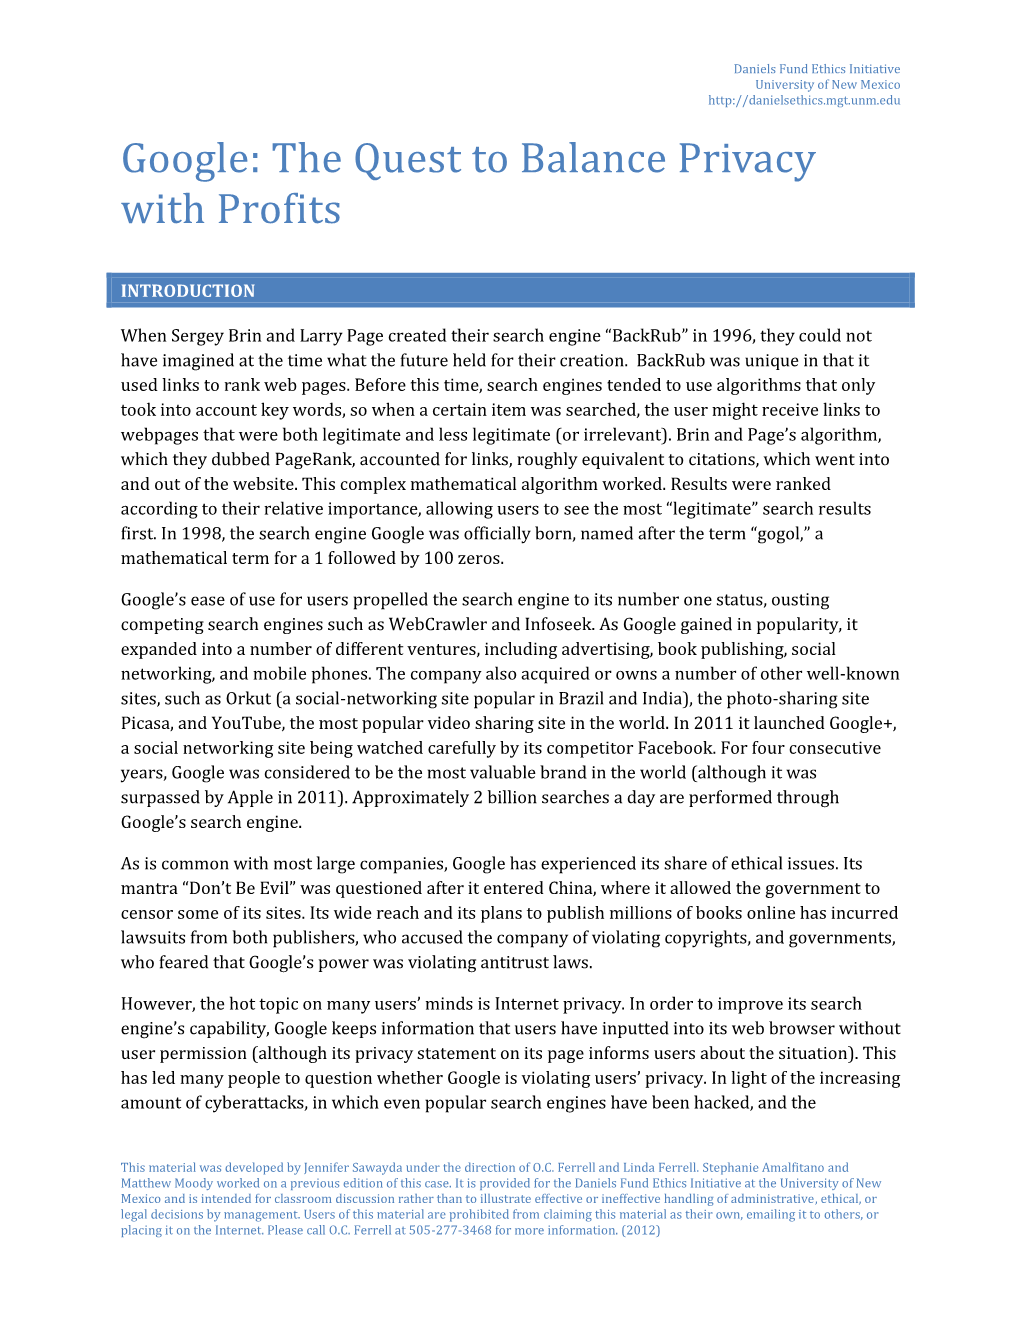 Google: the Quest to Balance Privacy with Profits